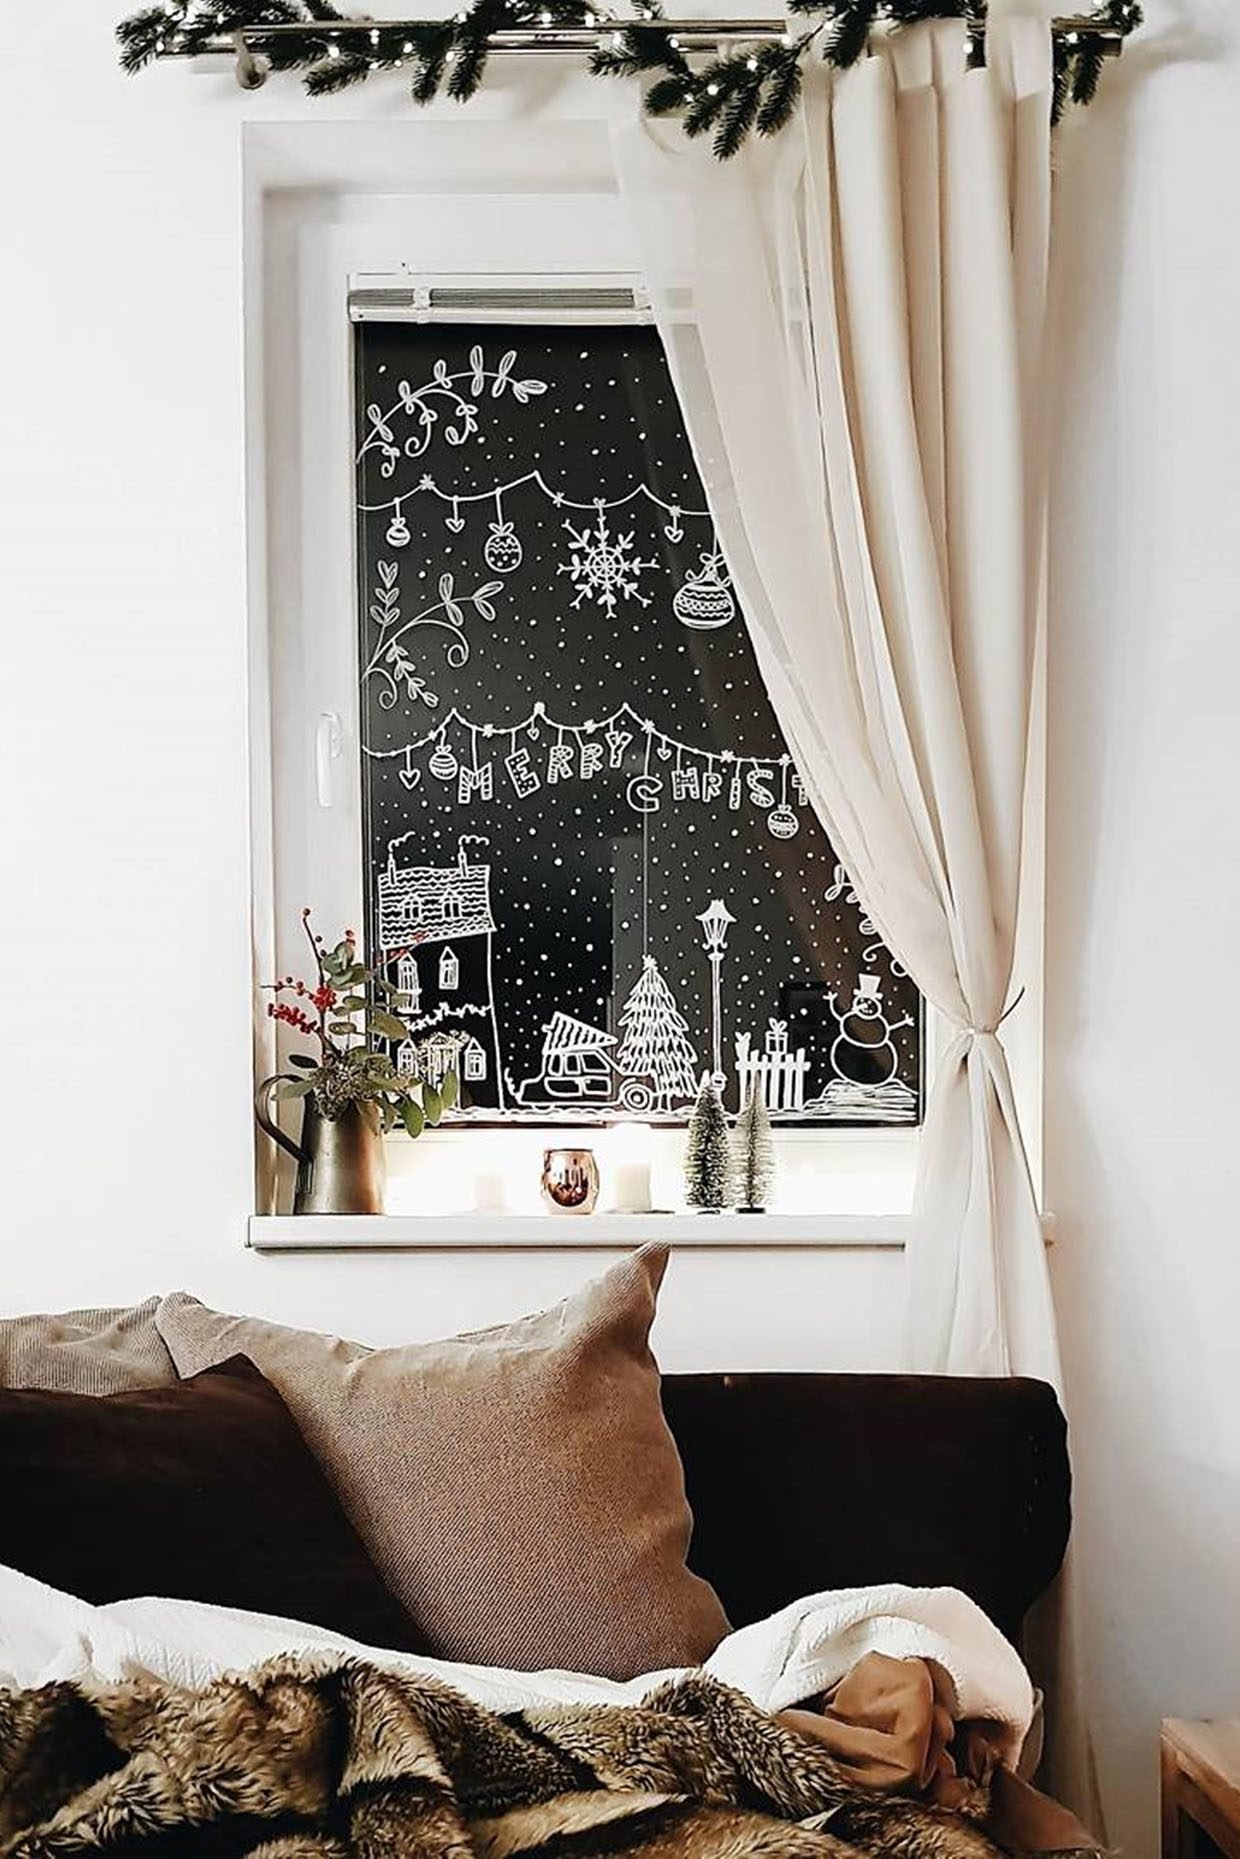 How to use window paint markers to create festive art